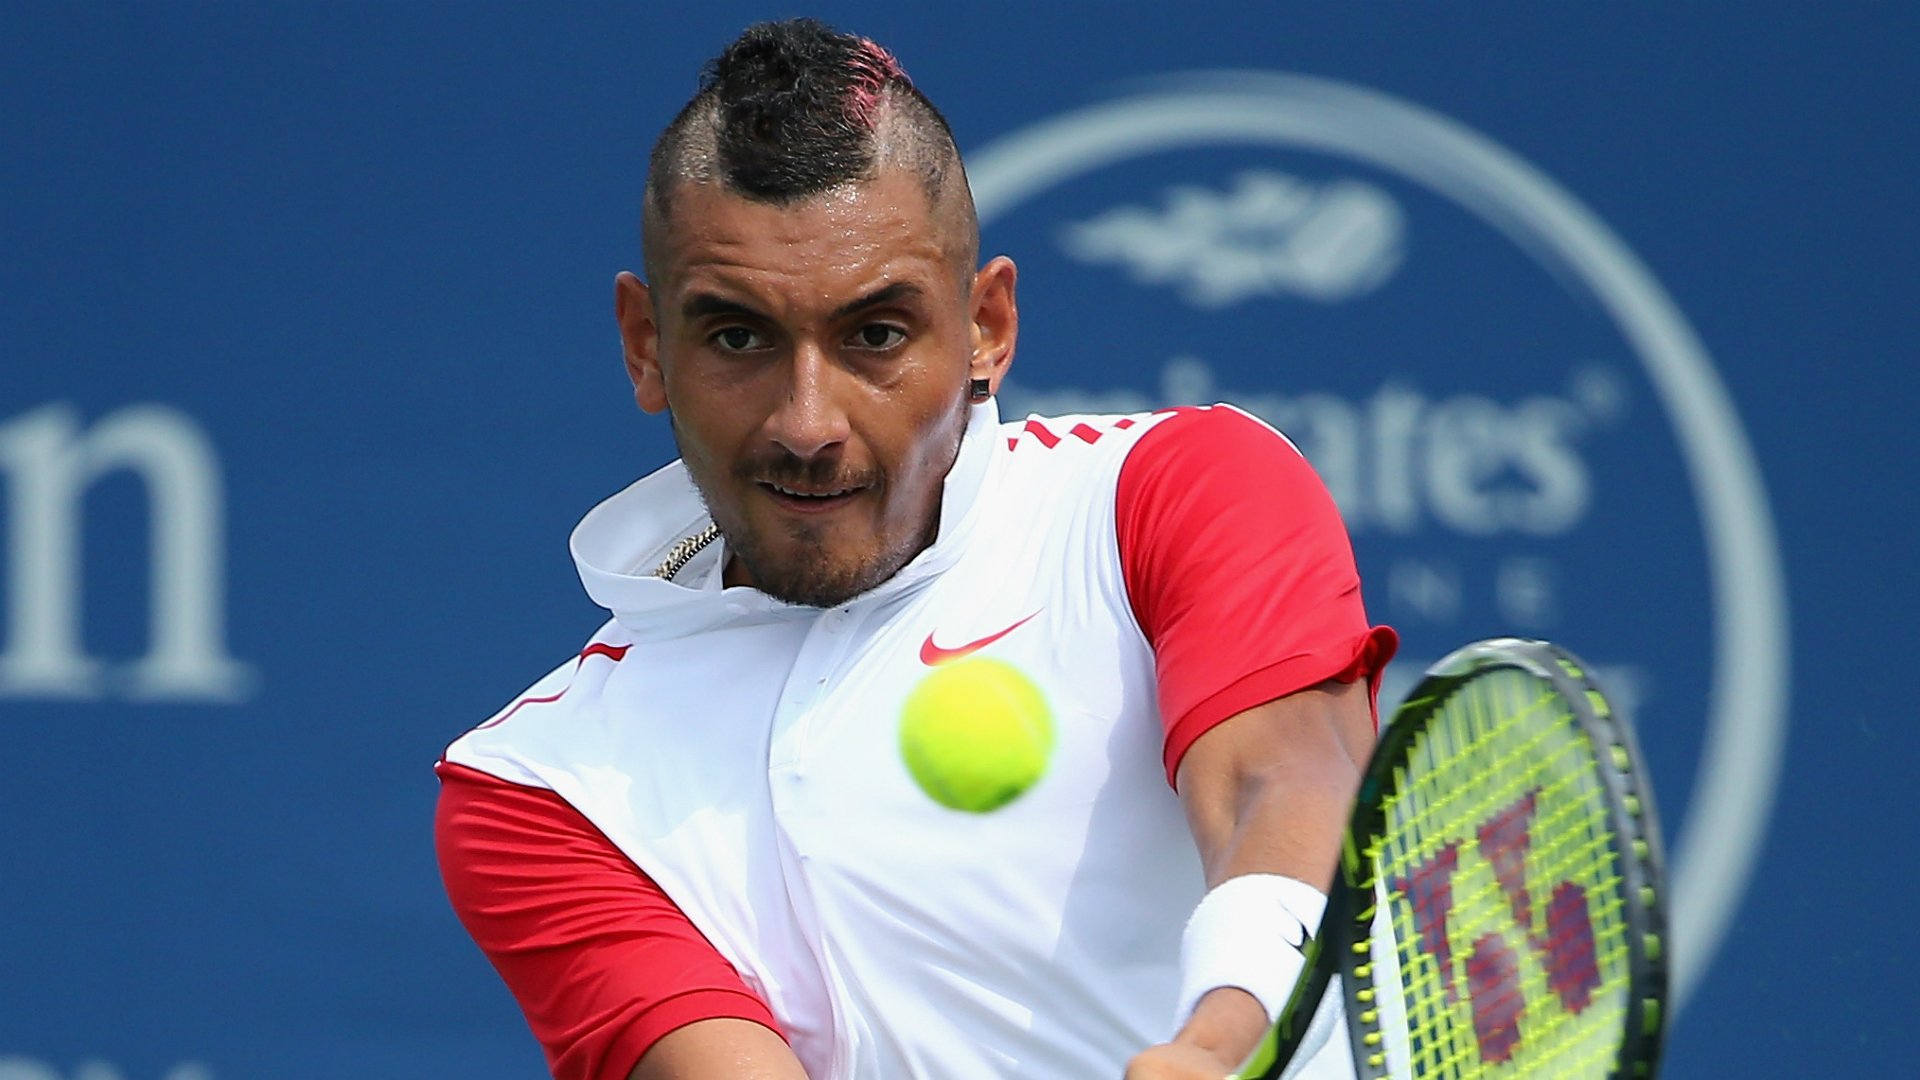 Nick Kyrgios: I'm not embarrassed